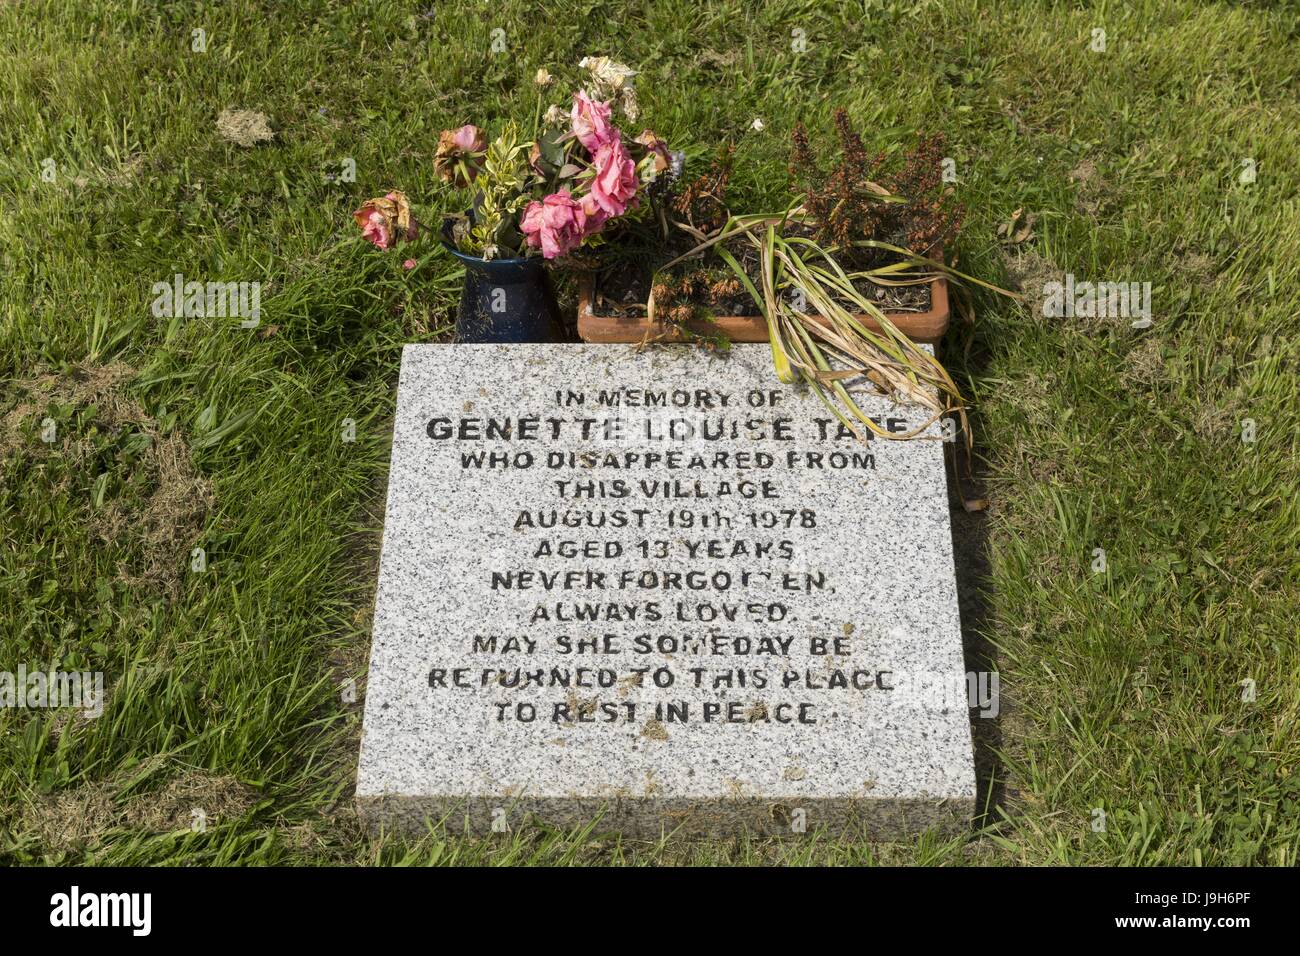 Aylesbeare, Devon, UK. 22nd May, 2017. A plaque commemorating Genette Tate in the churchyard at St Marys church, Aylesbeare, Devon, Genette disappeared from the village inj 1978. Councillor Peter Faithful  is running for Parliament with an unusual manifesto - to discover Gennette's remains. Her disappearance was Britain's longest ever missing person investigation. Credit: Photo Central/Alamy Live News Stock Photo